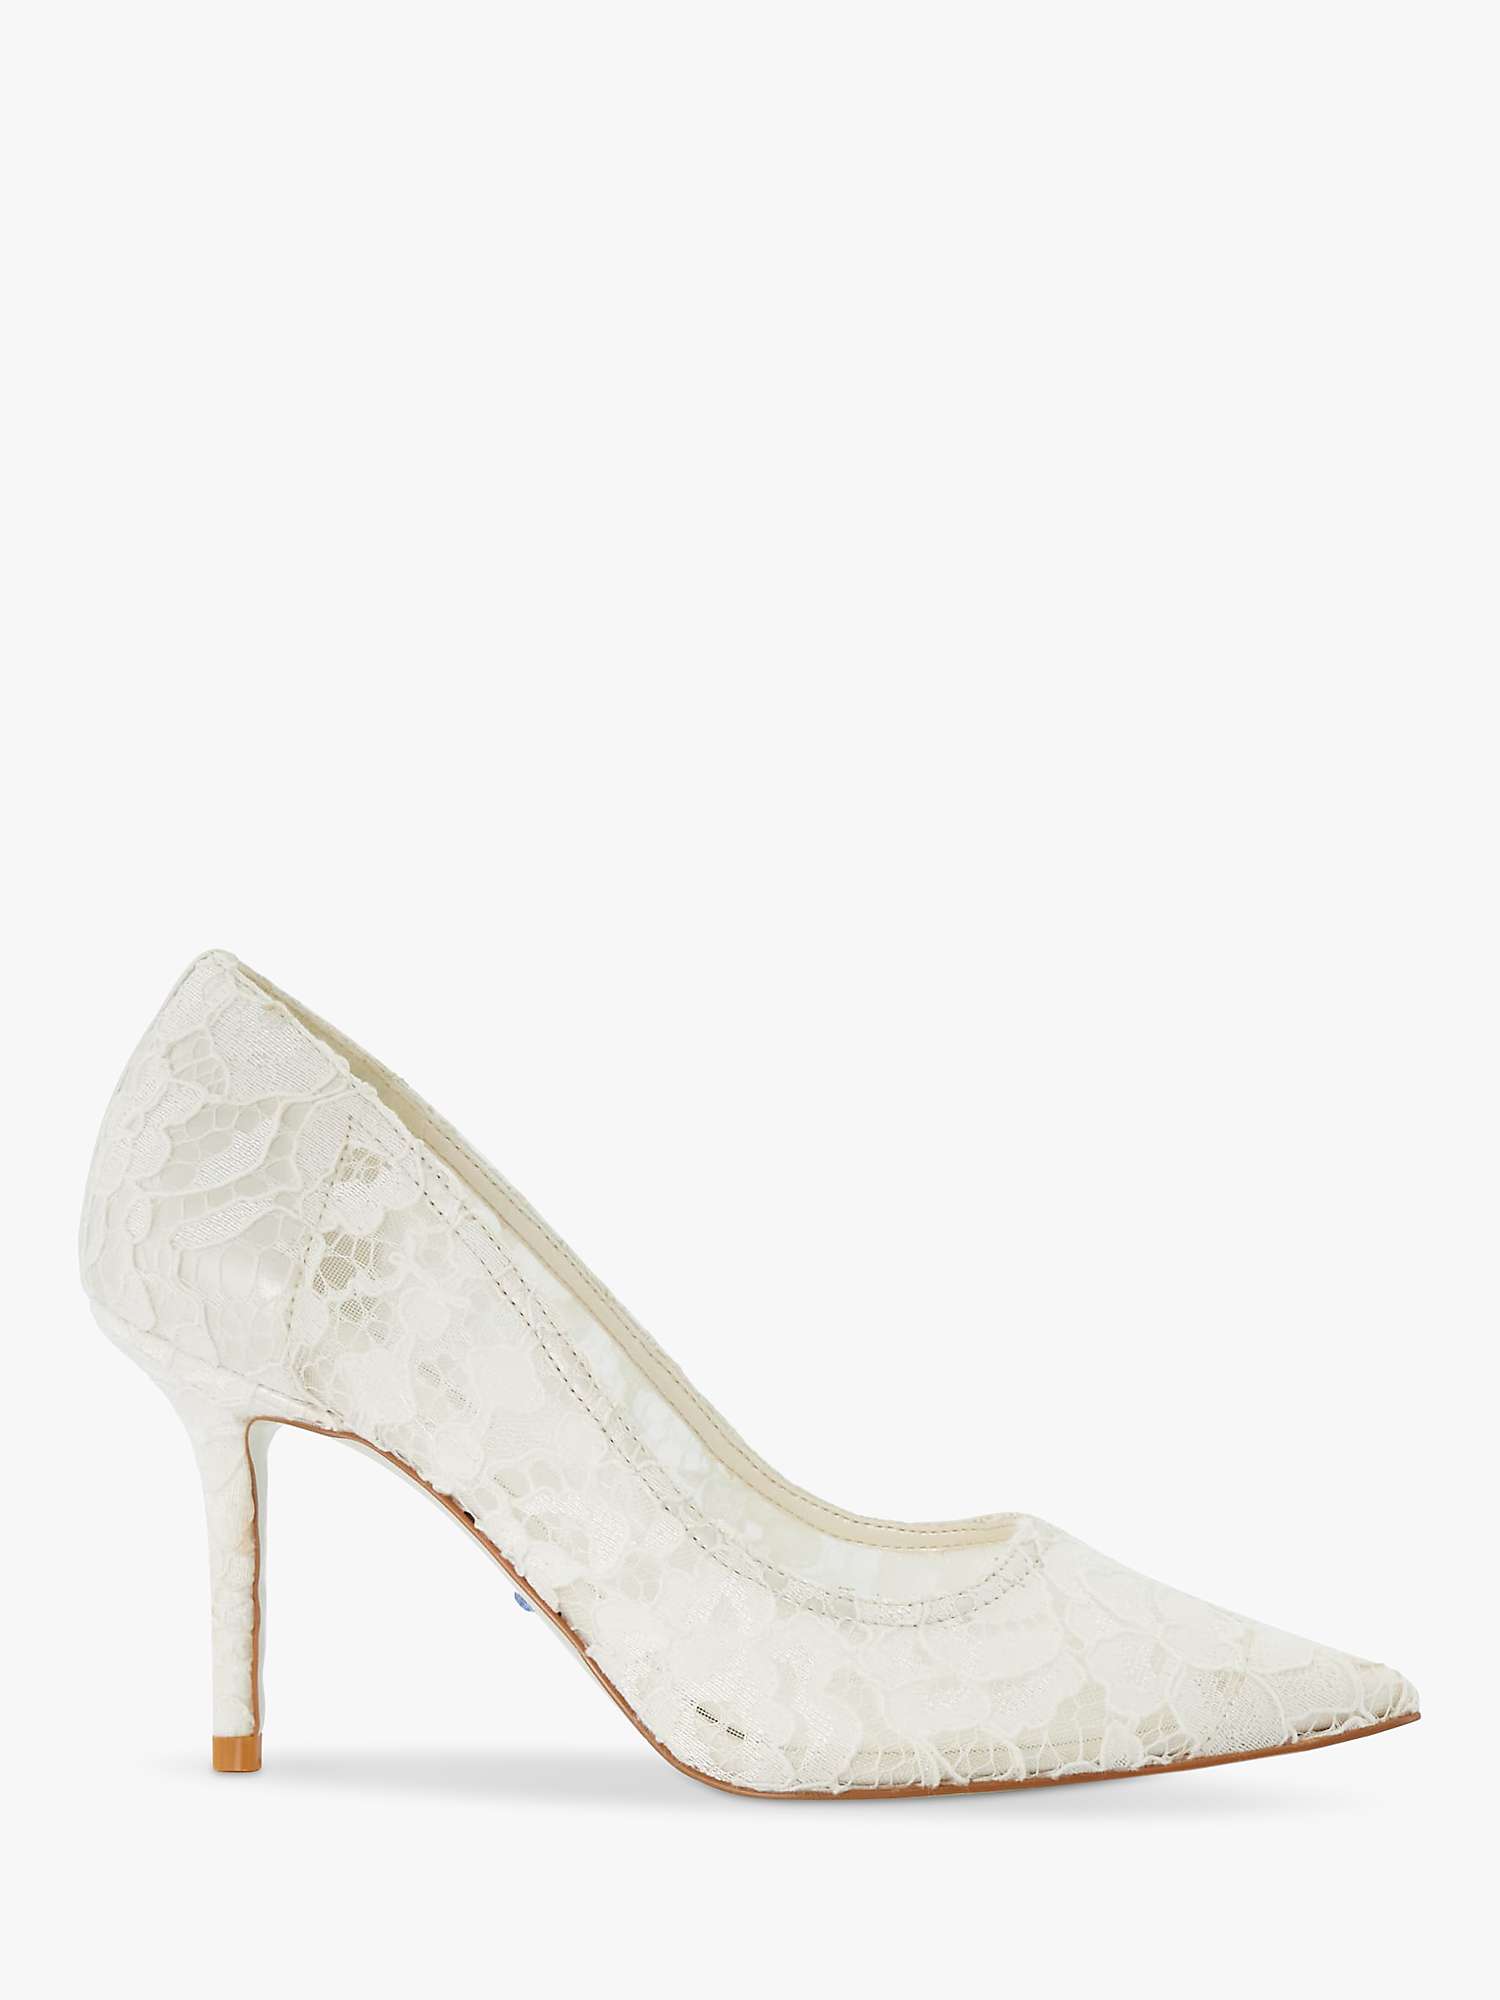 Buy Dune Bridal Collection Adoring Lace Stiletto Court Shoes, Ivory Online at johnlewis.com